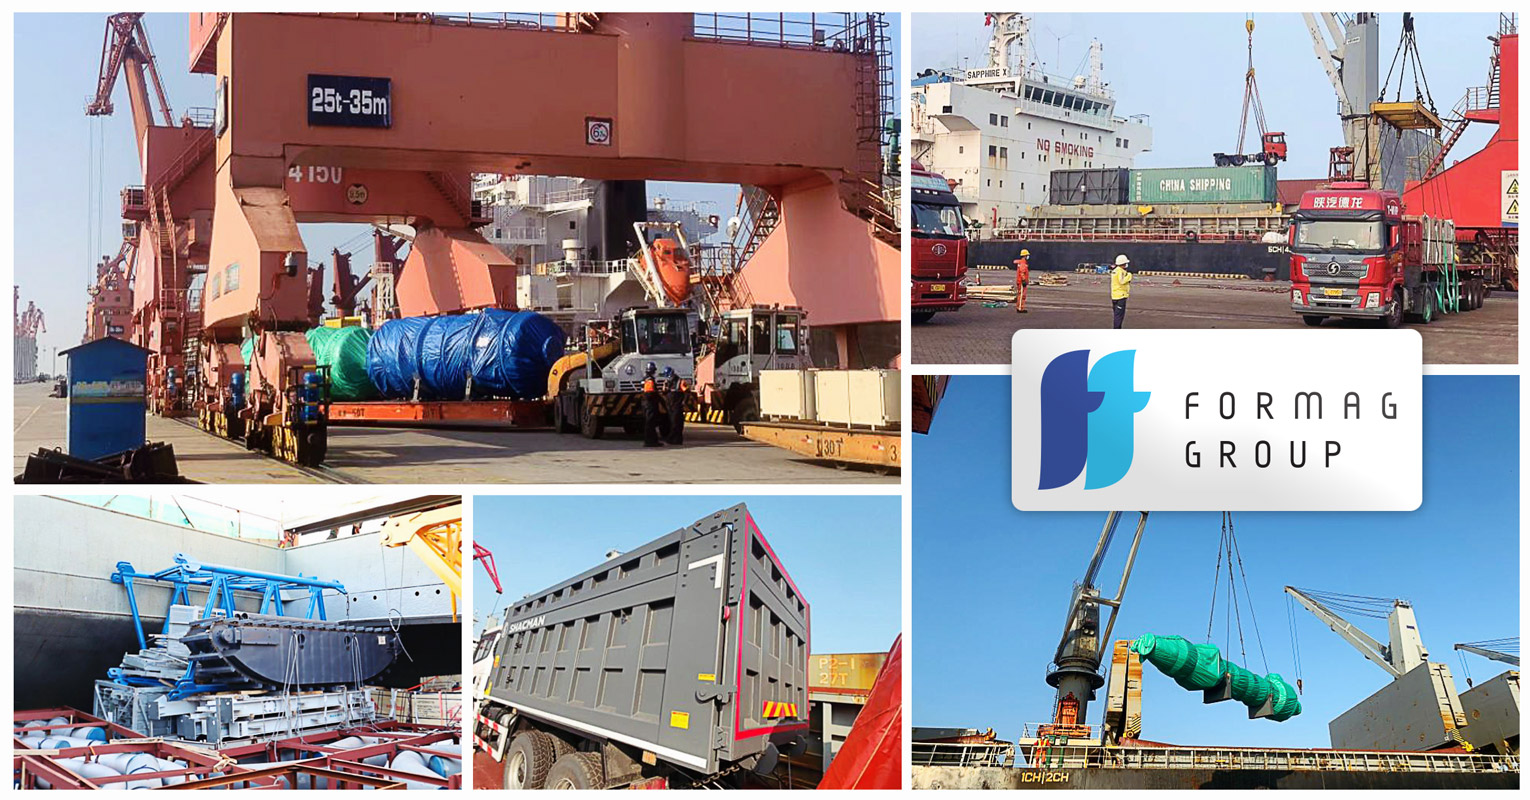 Formag Group Handled OOG Equipment Along with 100's of Containers and Other Cargo in Week 48